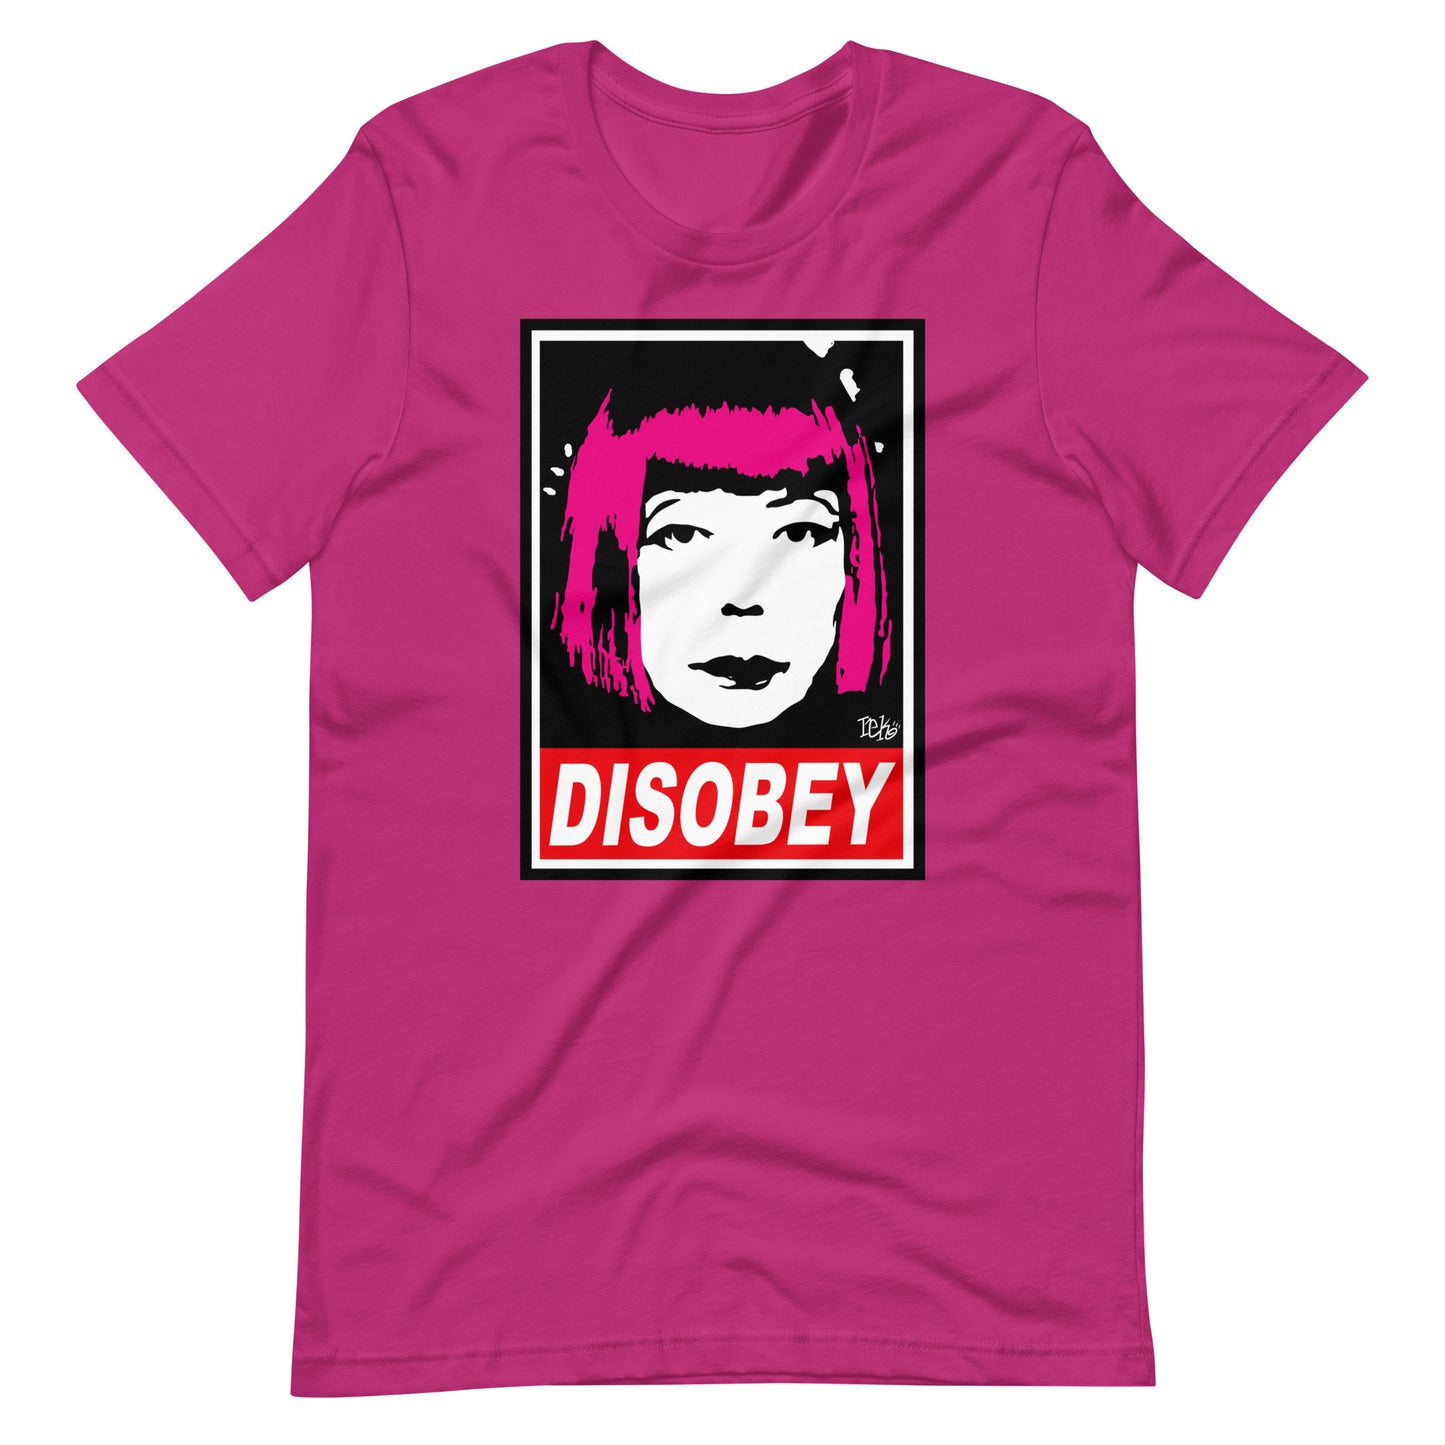 Disobey Pink Unisex T-shirt